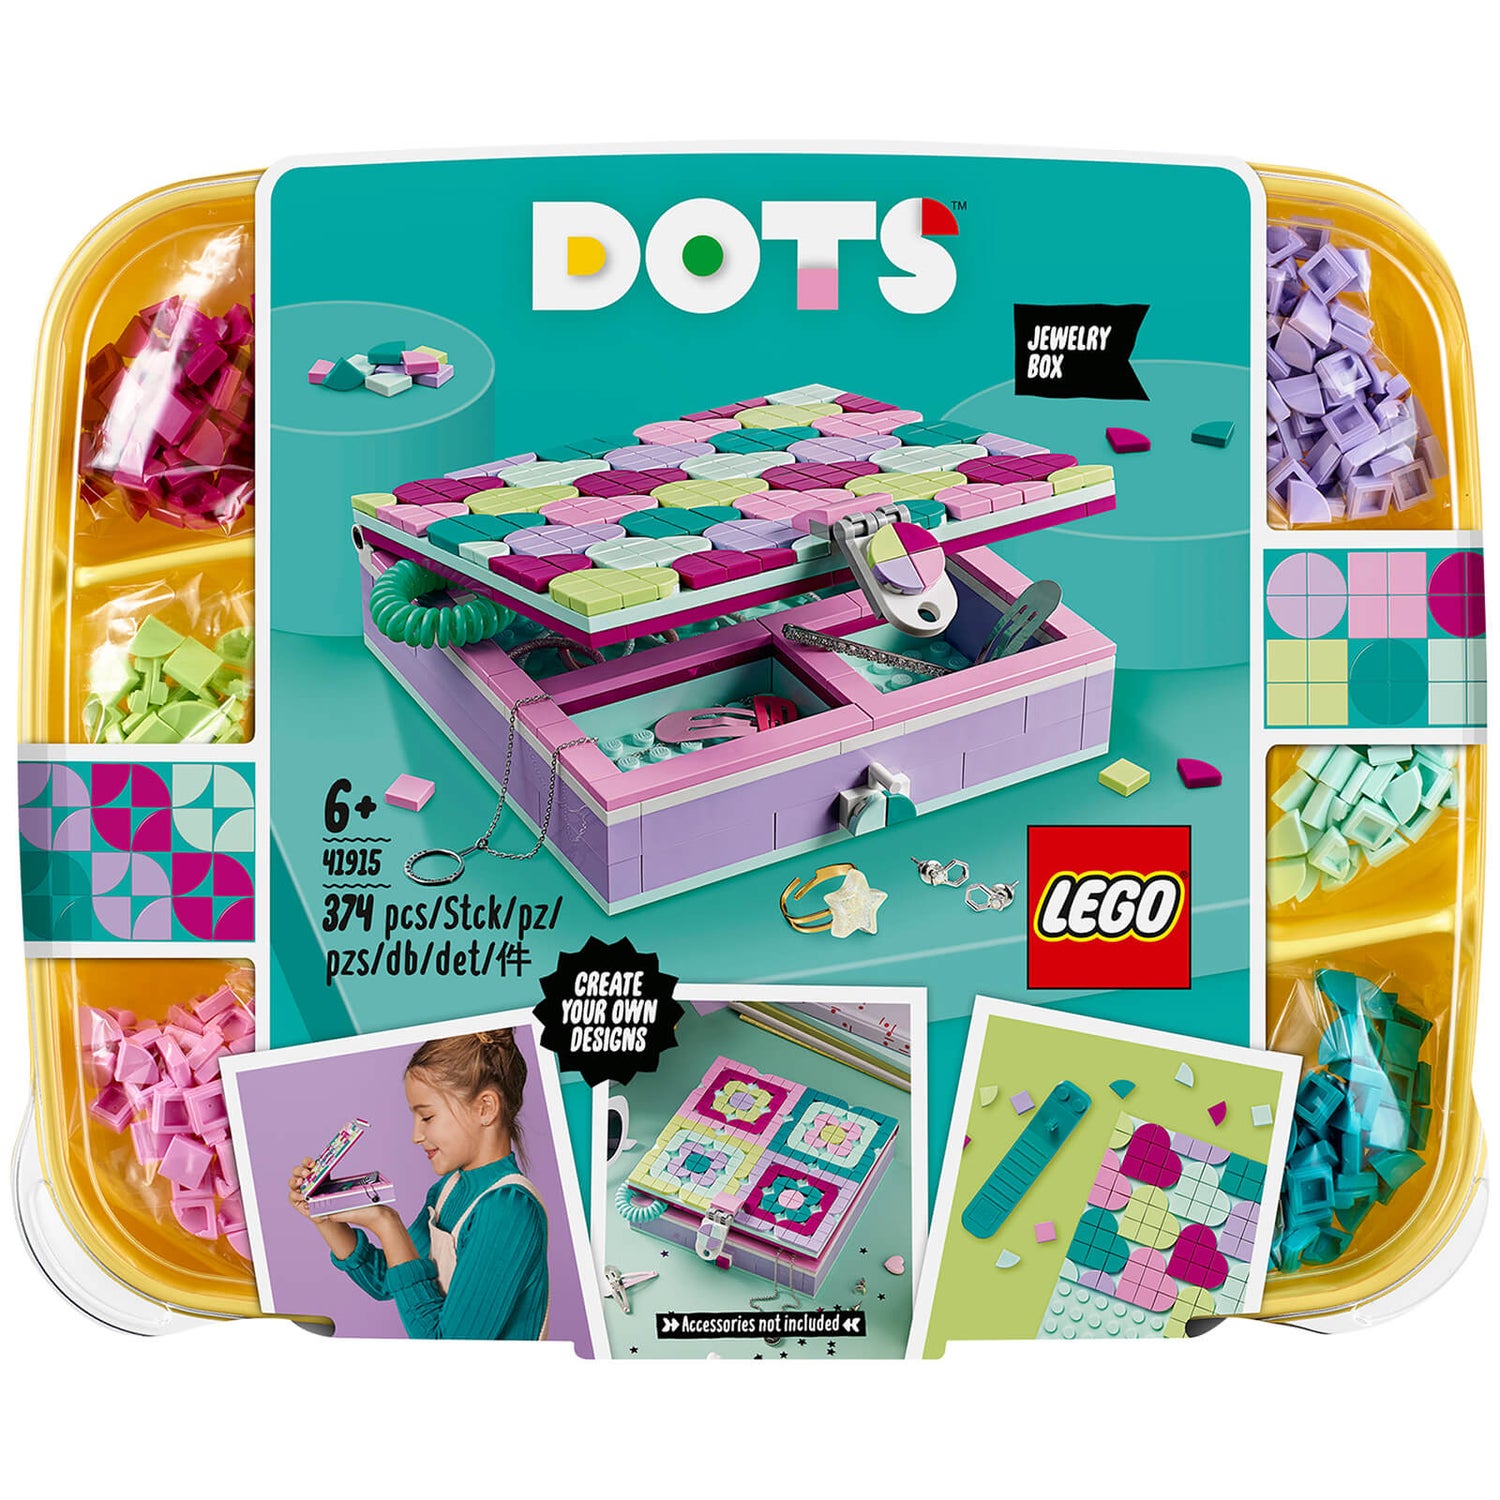 DOTS: Jewellery Box Arts & Crafts for Kids Set by LEGO (41915)